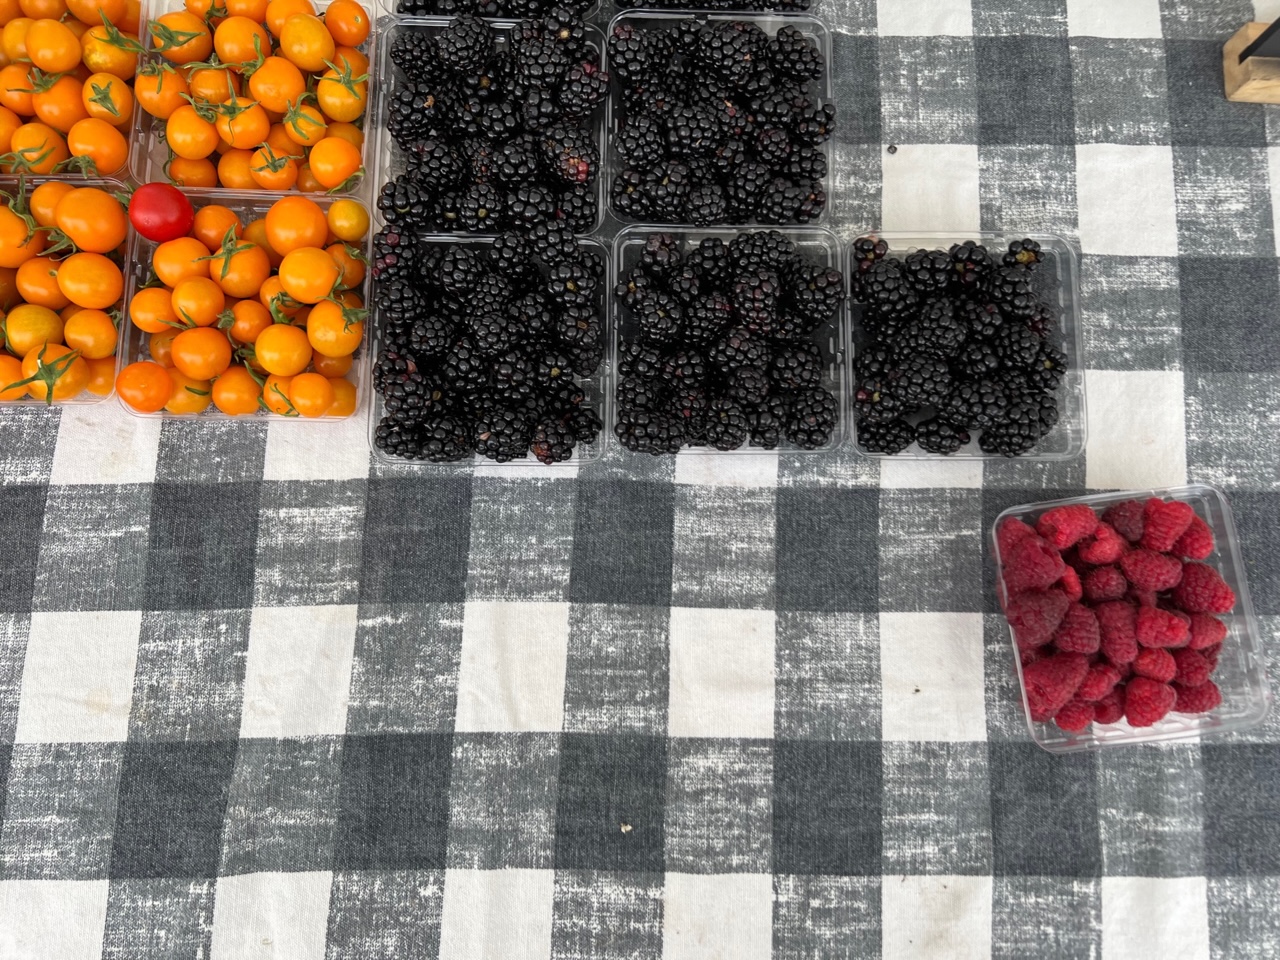 On a black-and-white checkered tablecloth, there are containers of cherry orange tomatoes, blackberries, and raspberries. Photo by Alyssa Buckley.